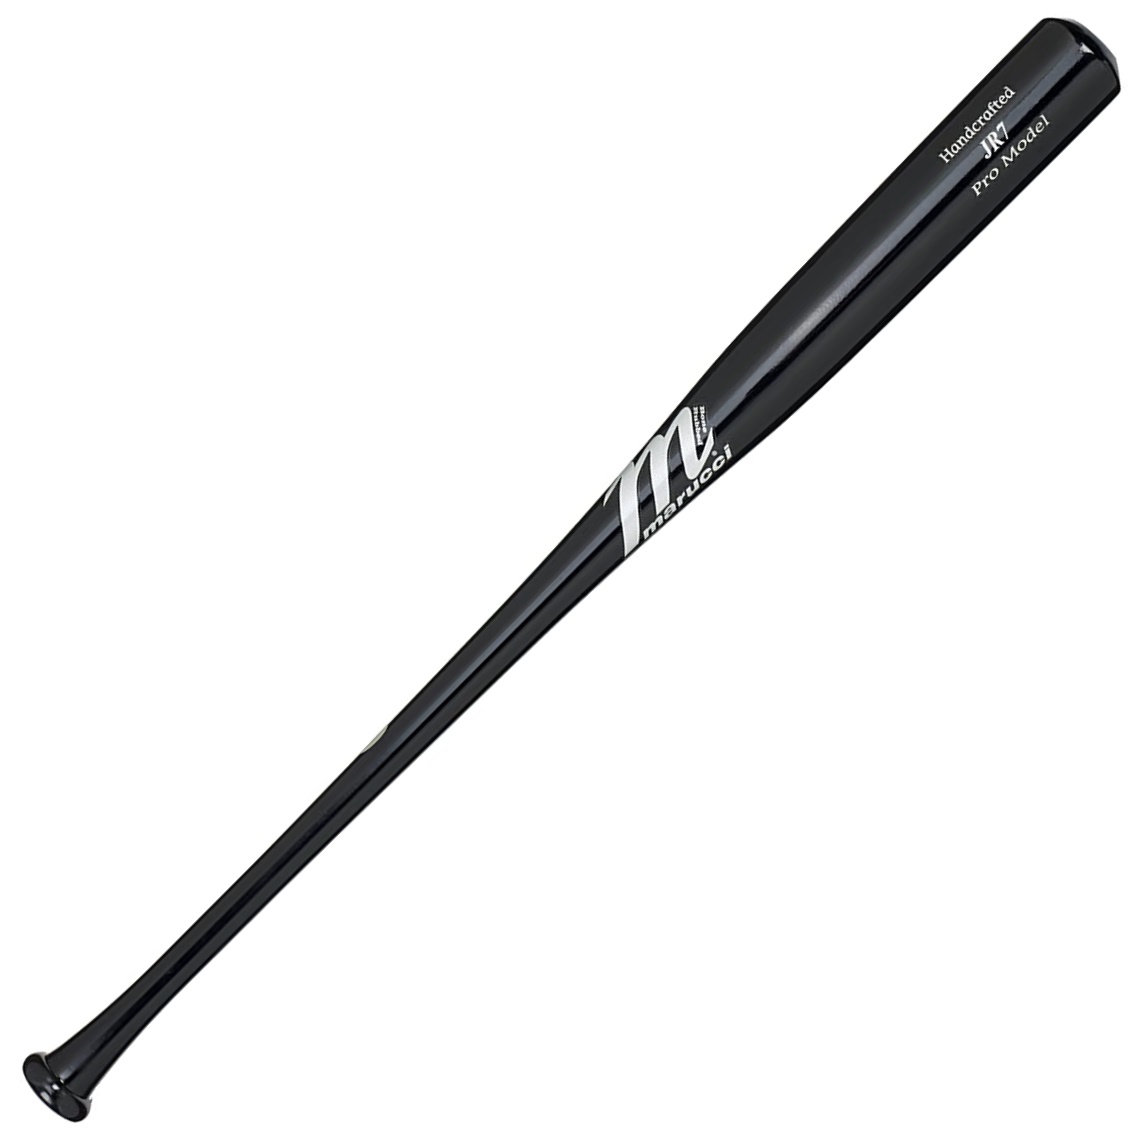 marucci-jr7-jose-reyes-pro-model-maple-wood-baseball-bat-33-inch MVEIJR7-SMBK-33 Marucci  Traditional Knob and Thick Handle Large Barrel Handcrafted from top-quality maple